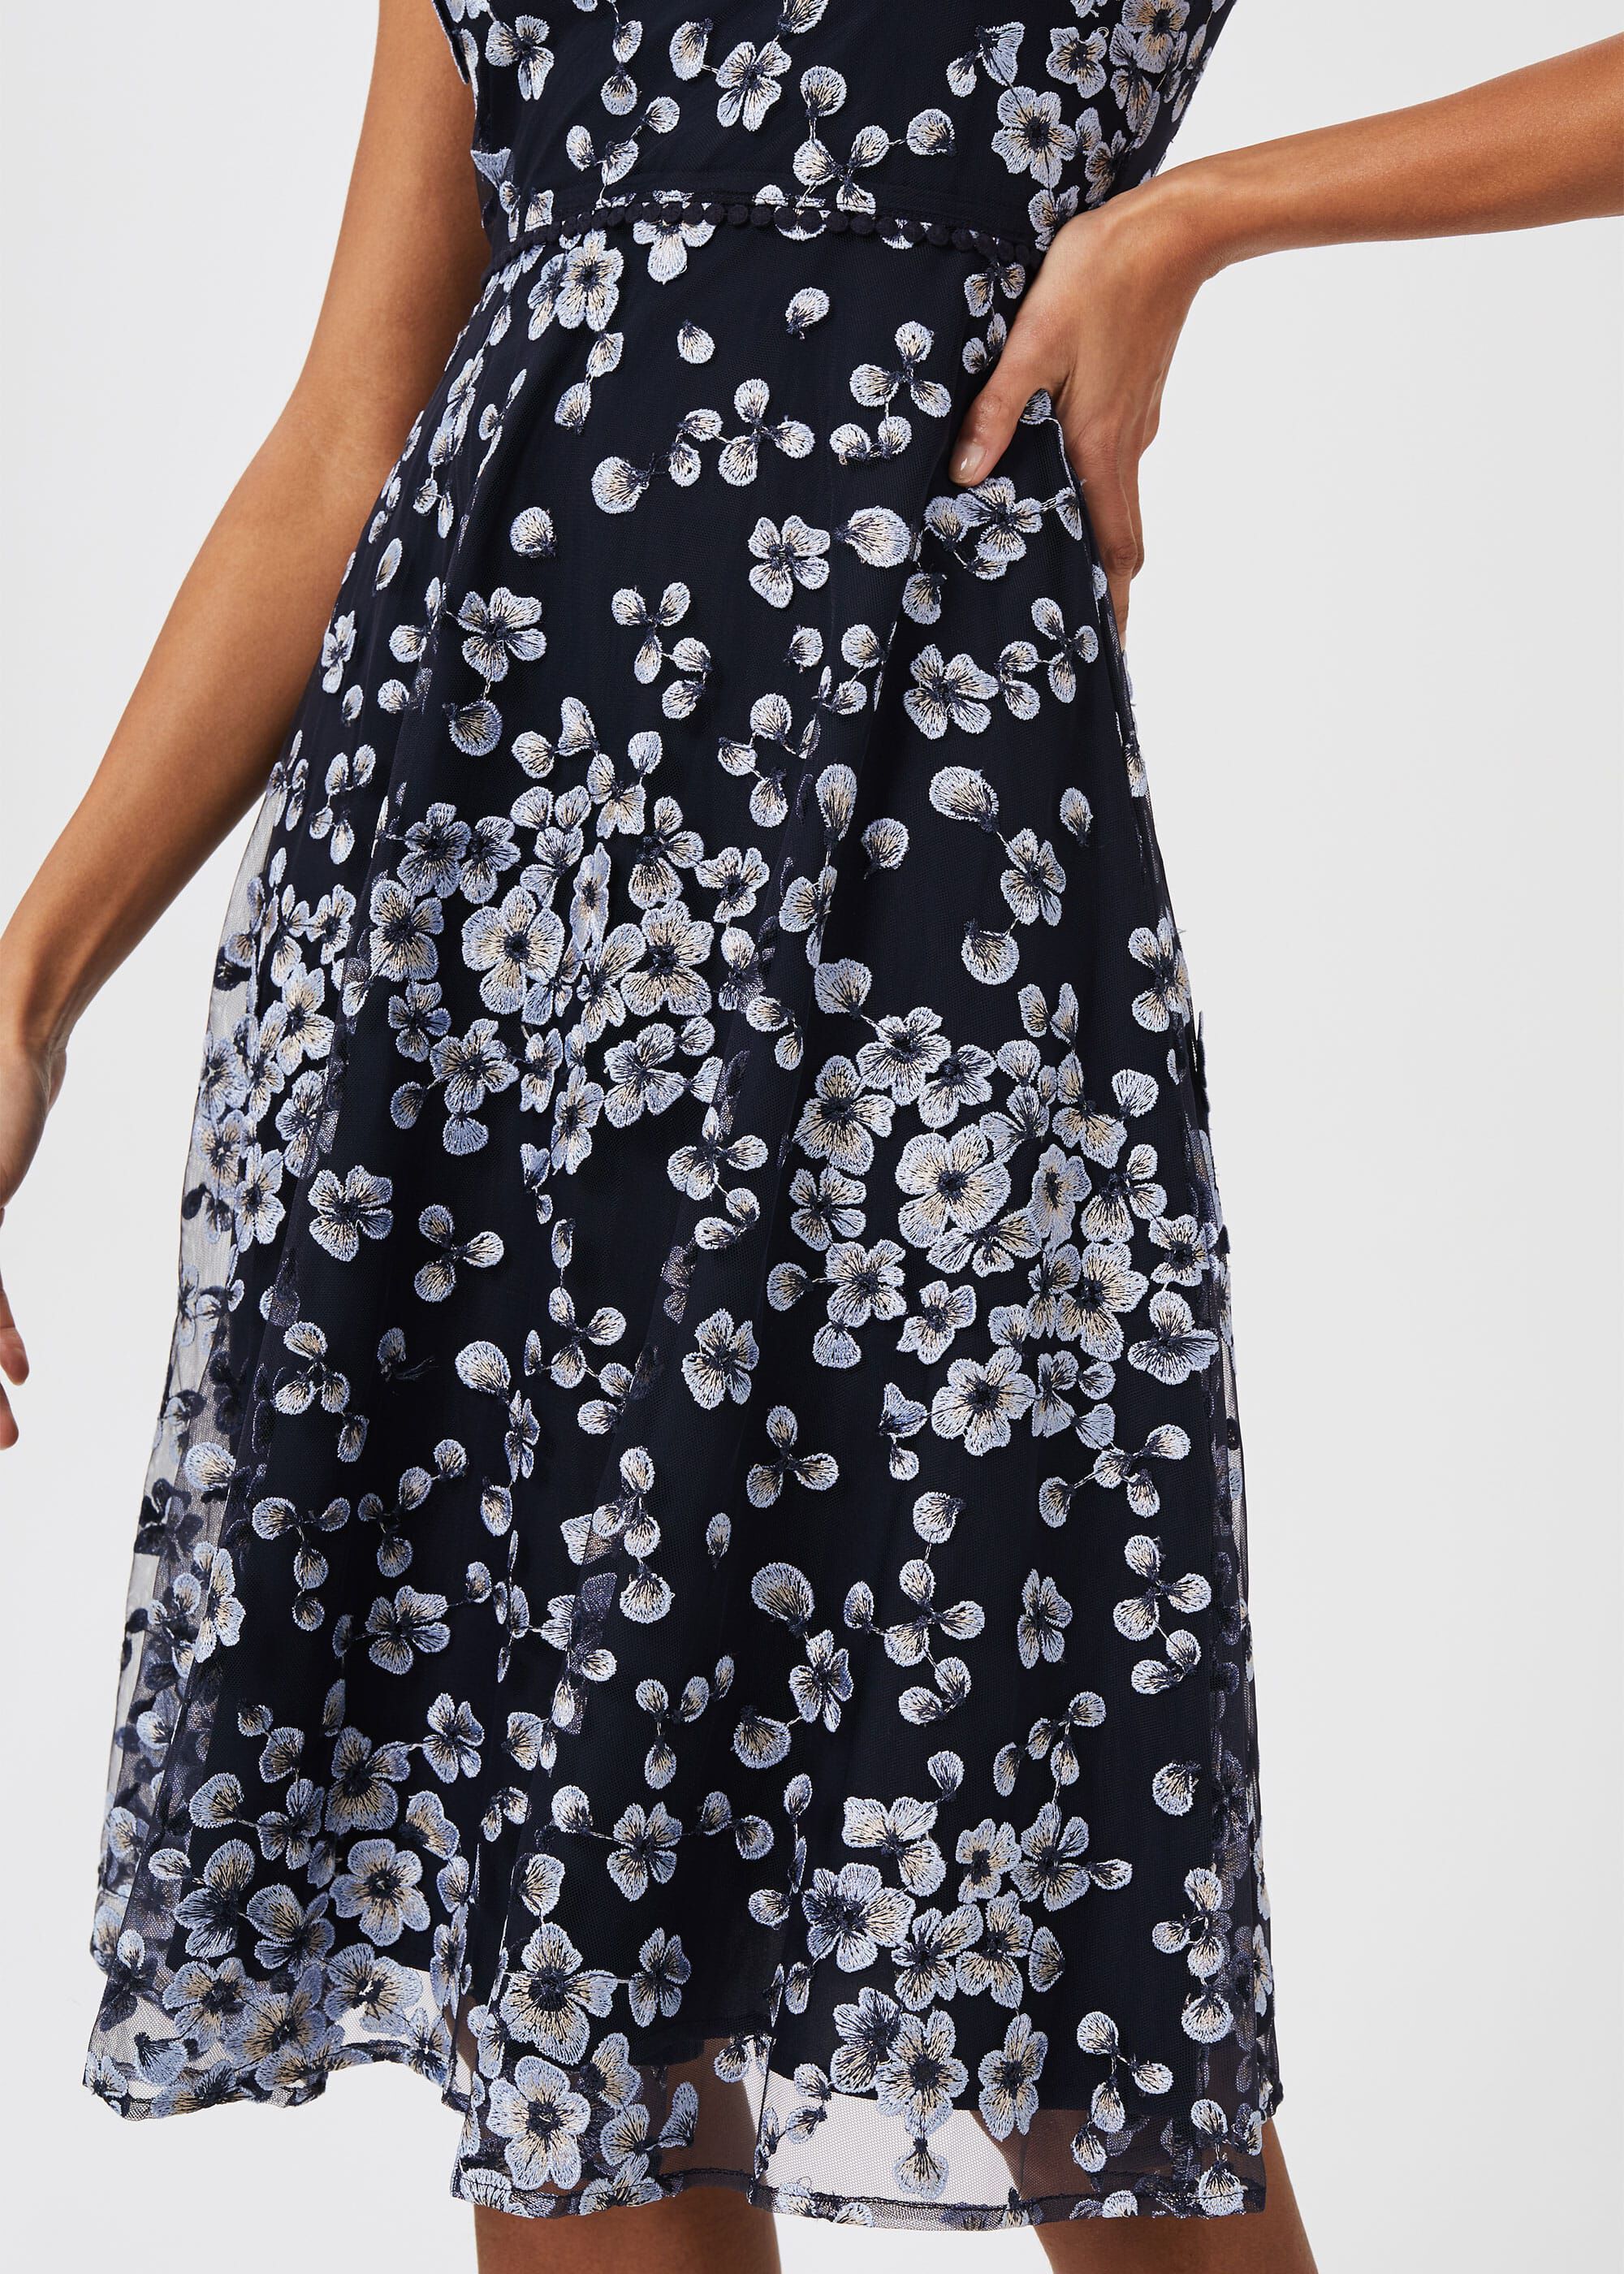 Lilith Embroidered Floral Dress | Hobbs